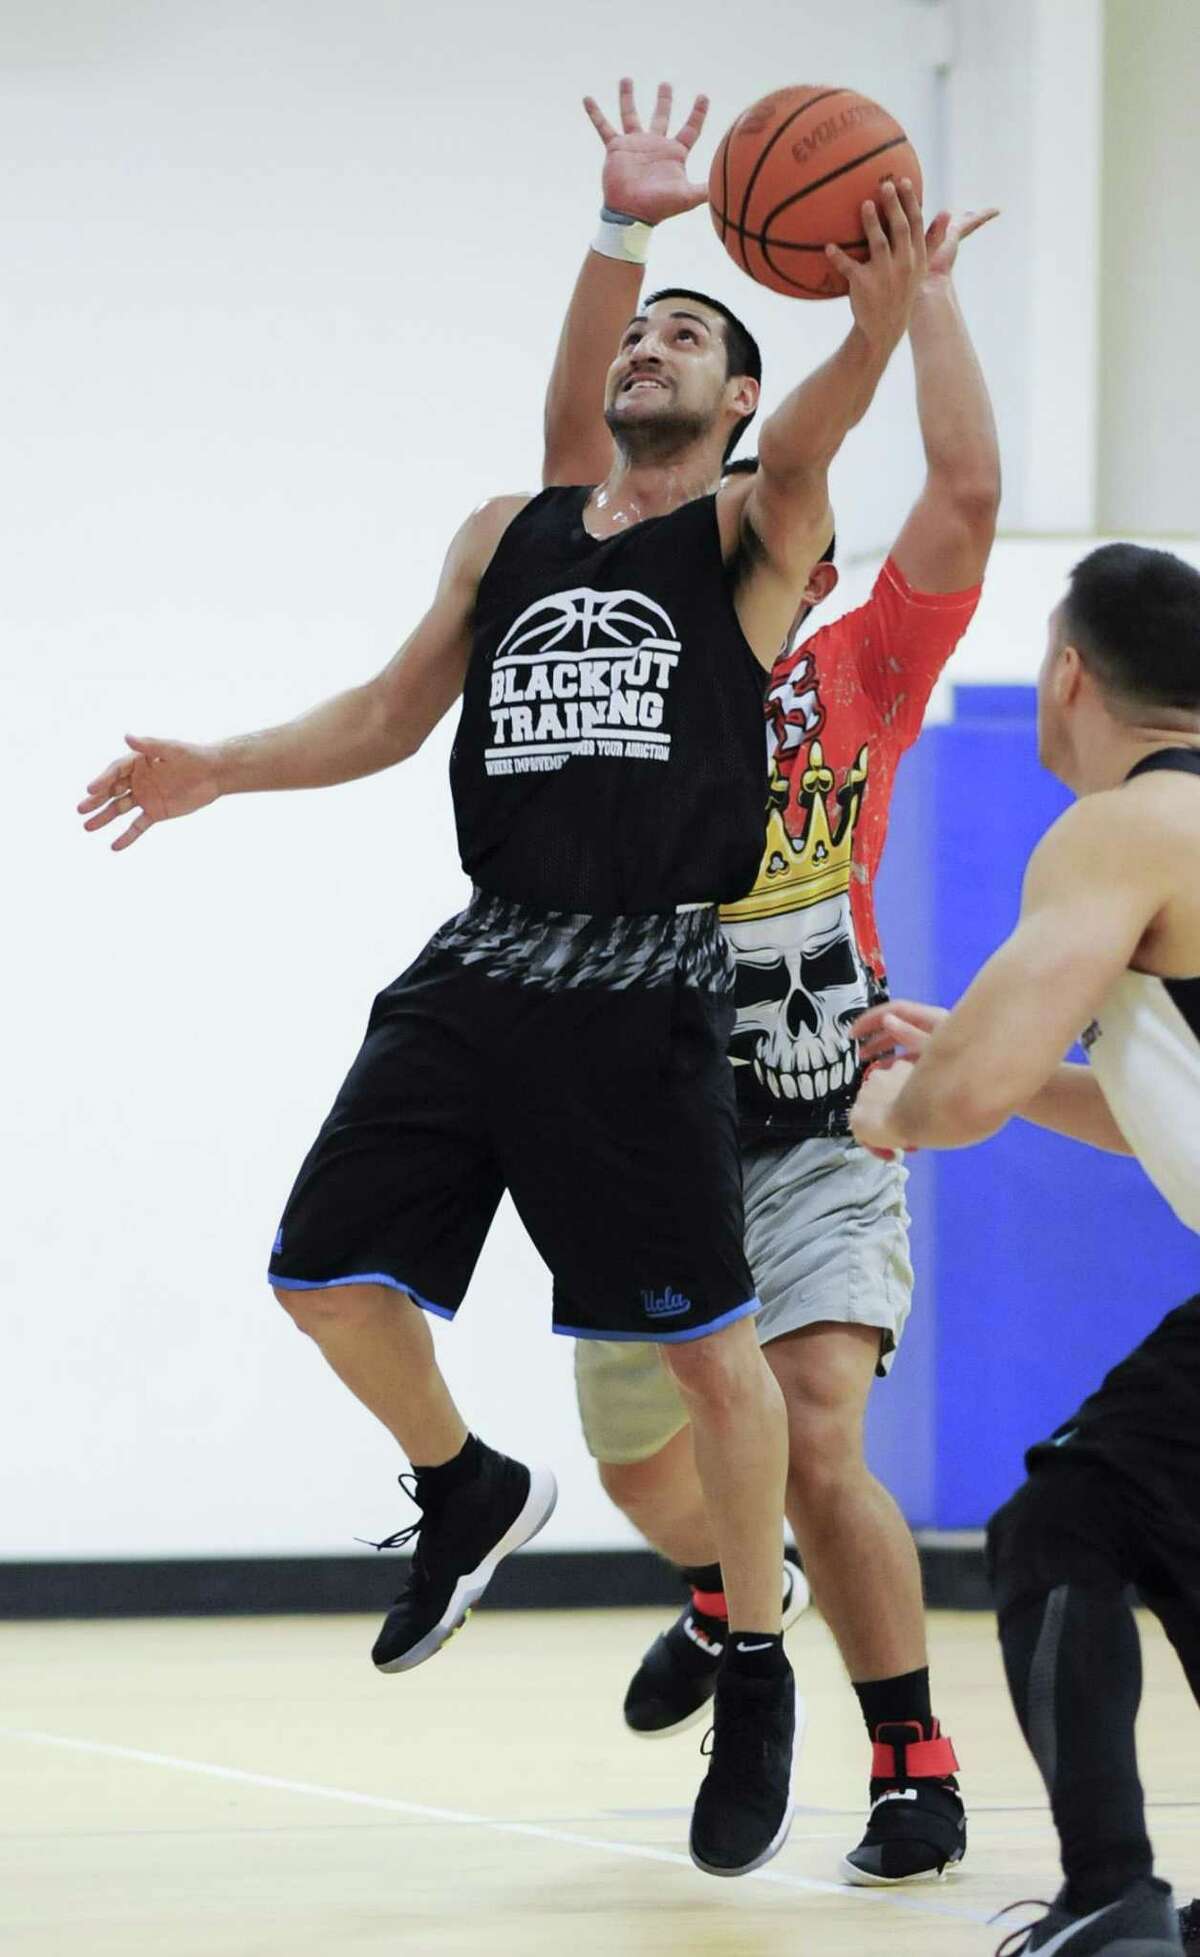 The Blackout defeated defending Division A champion Team Pompa 65-60 last week in the Laredo Adult Basketball League and are sitting in first place at 7-1 with two weeks remaining in the regular season.